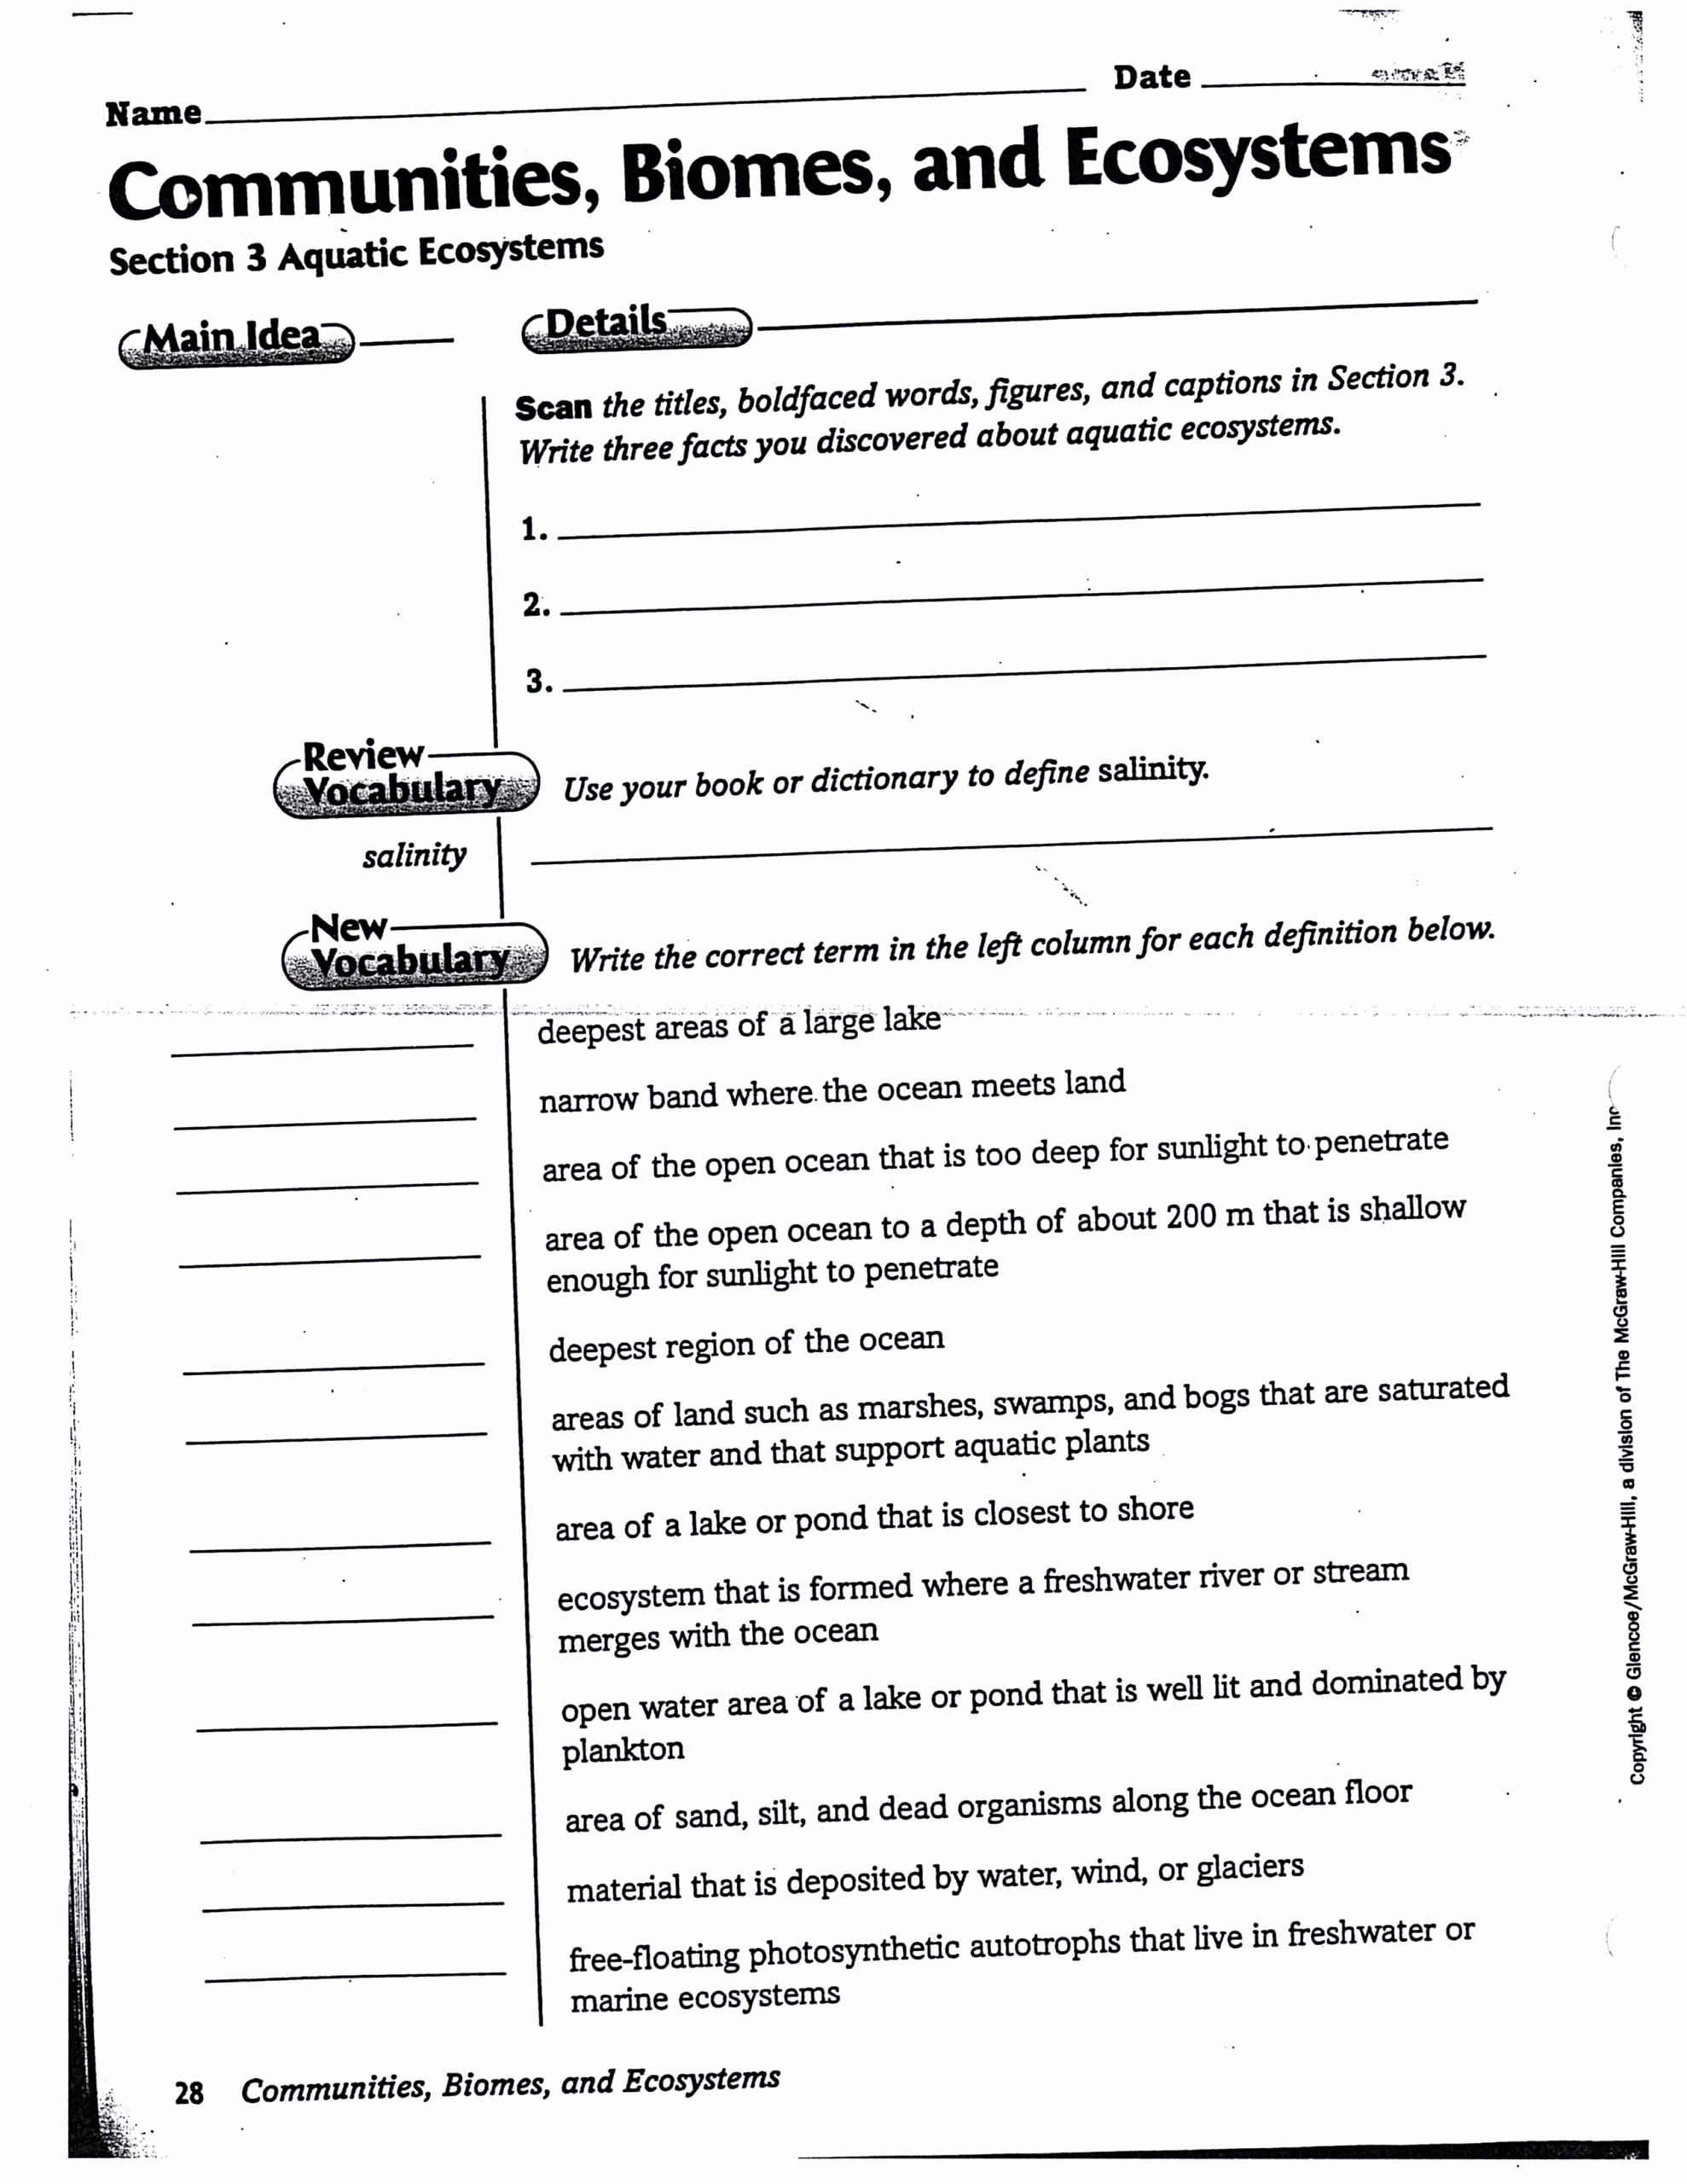 Free Printable Ecosystem Worksheets Luxury Ecosystem Worksheets for Middle School Pdf